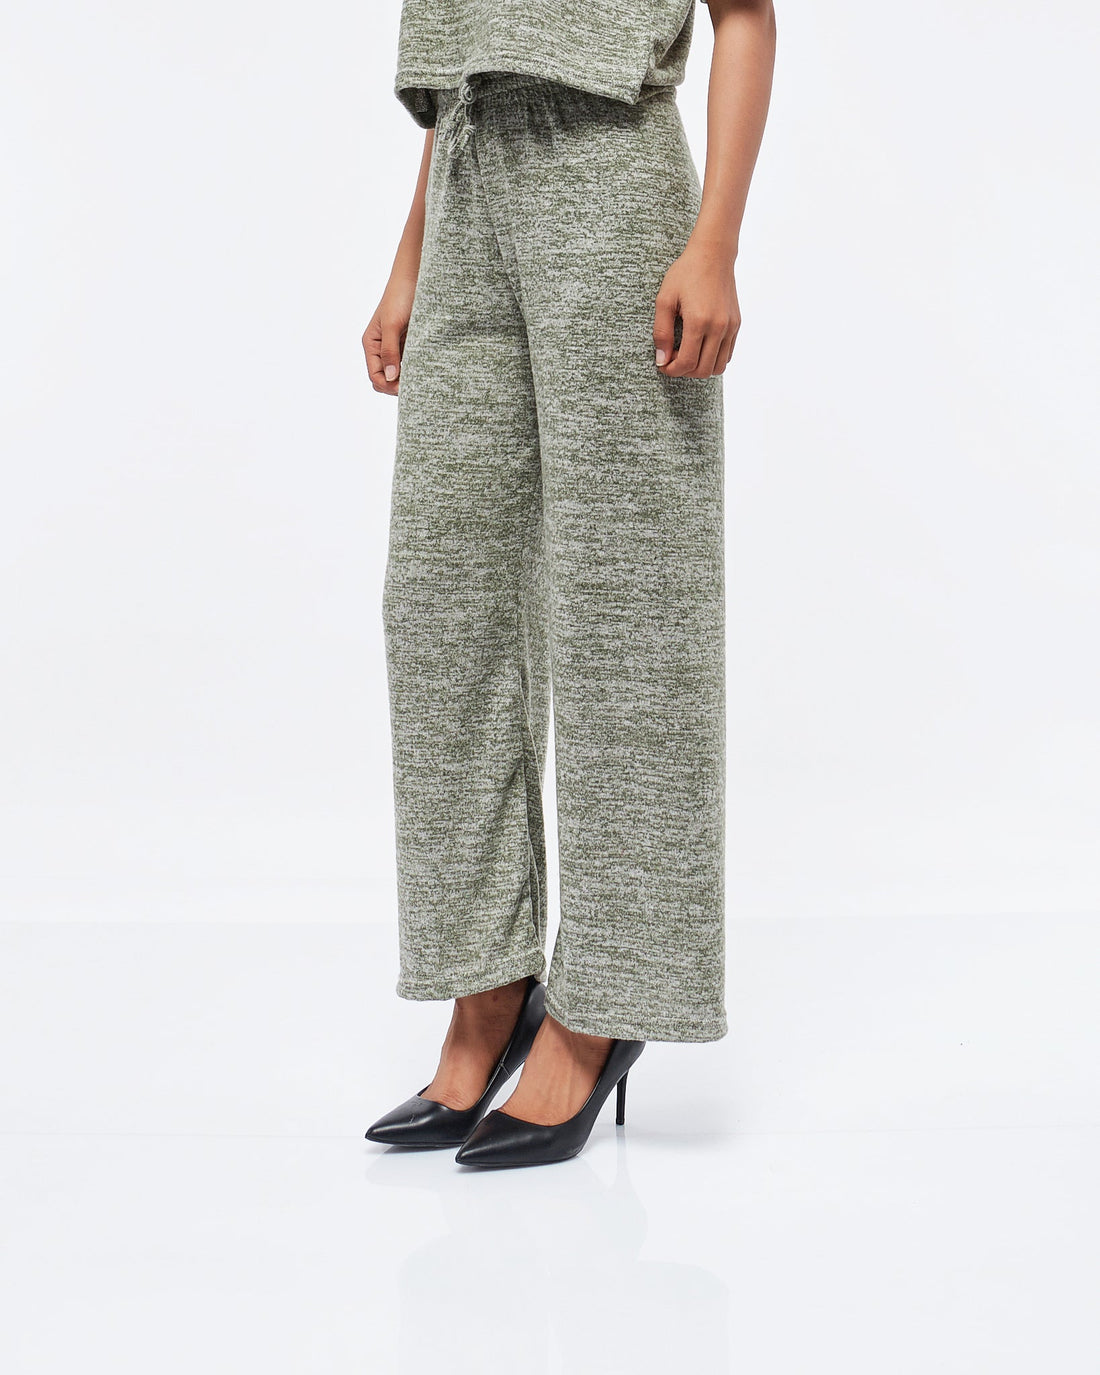 MOI OUTFIT-Cozy Lady Pants 8.90